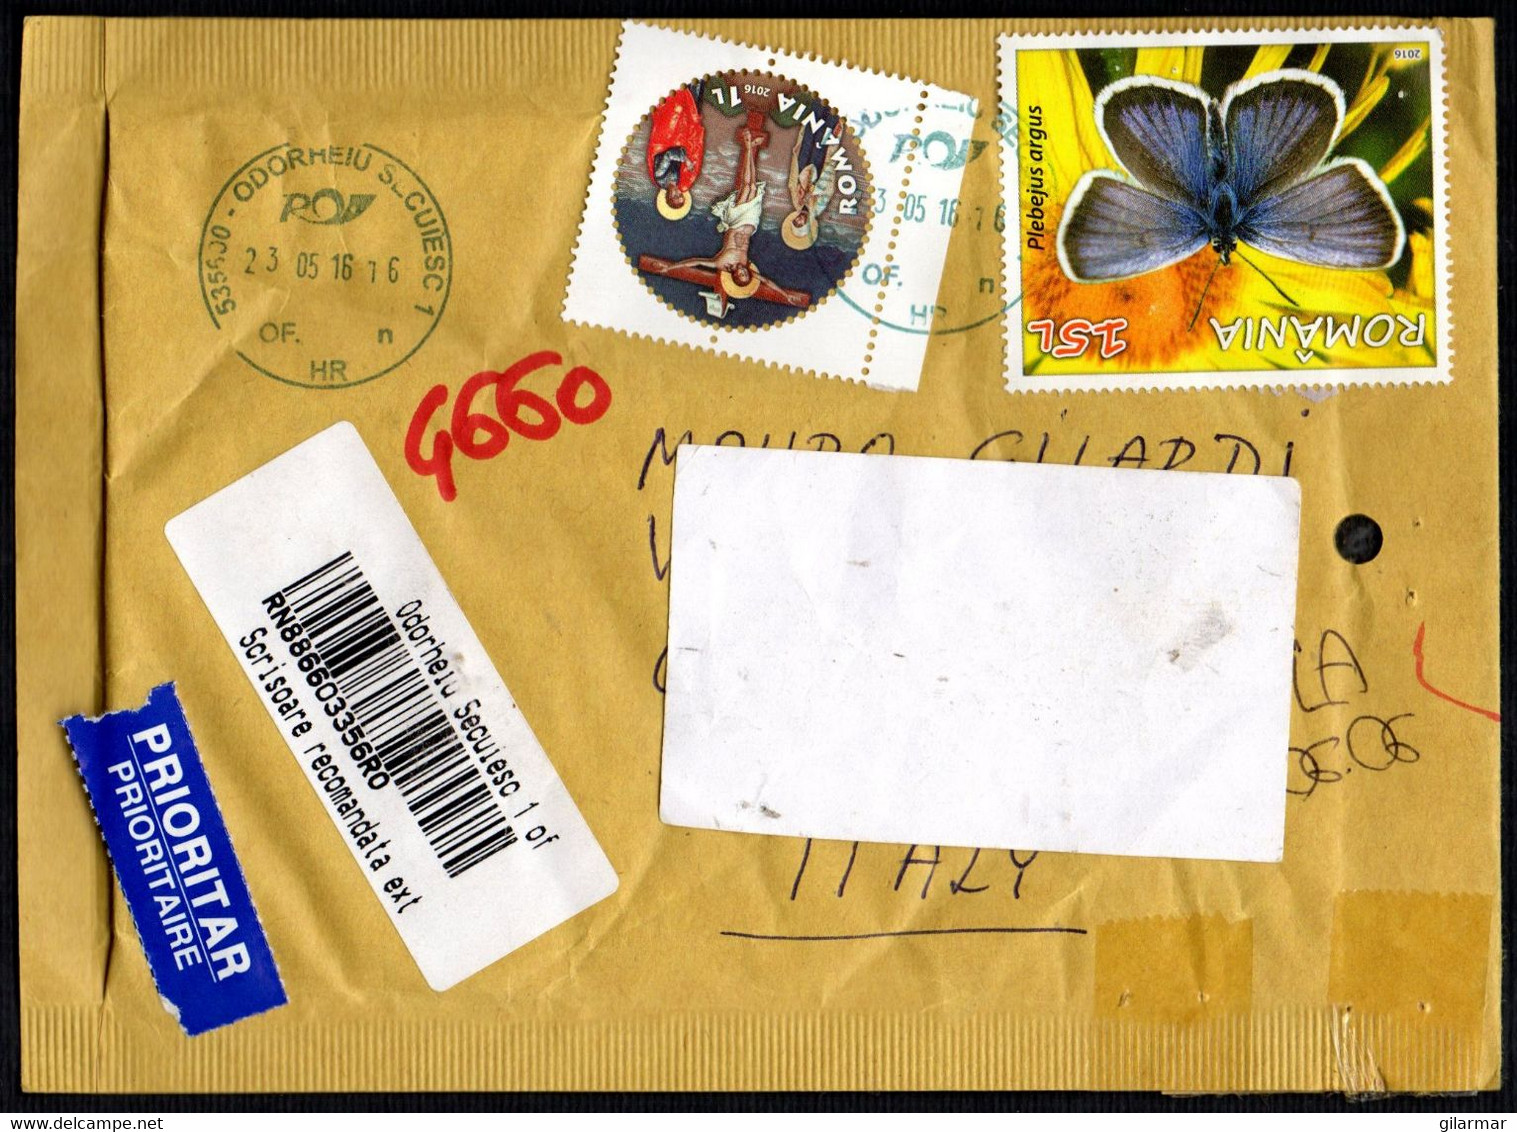 ROMANIA 2016 - REGISTERED ENVELOPE - BUTTERFLY - ARGYNNIS PARPHIA / EASTER - JESUS CHRIST CRUCIFIED - Lettres & Documents